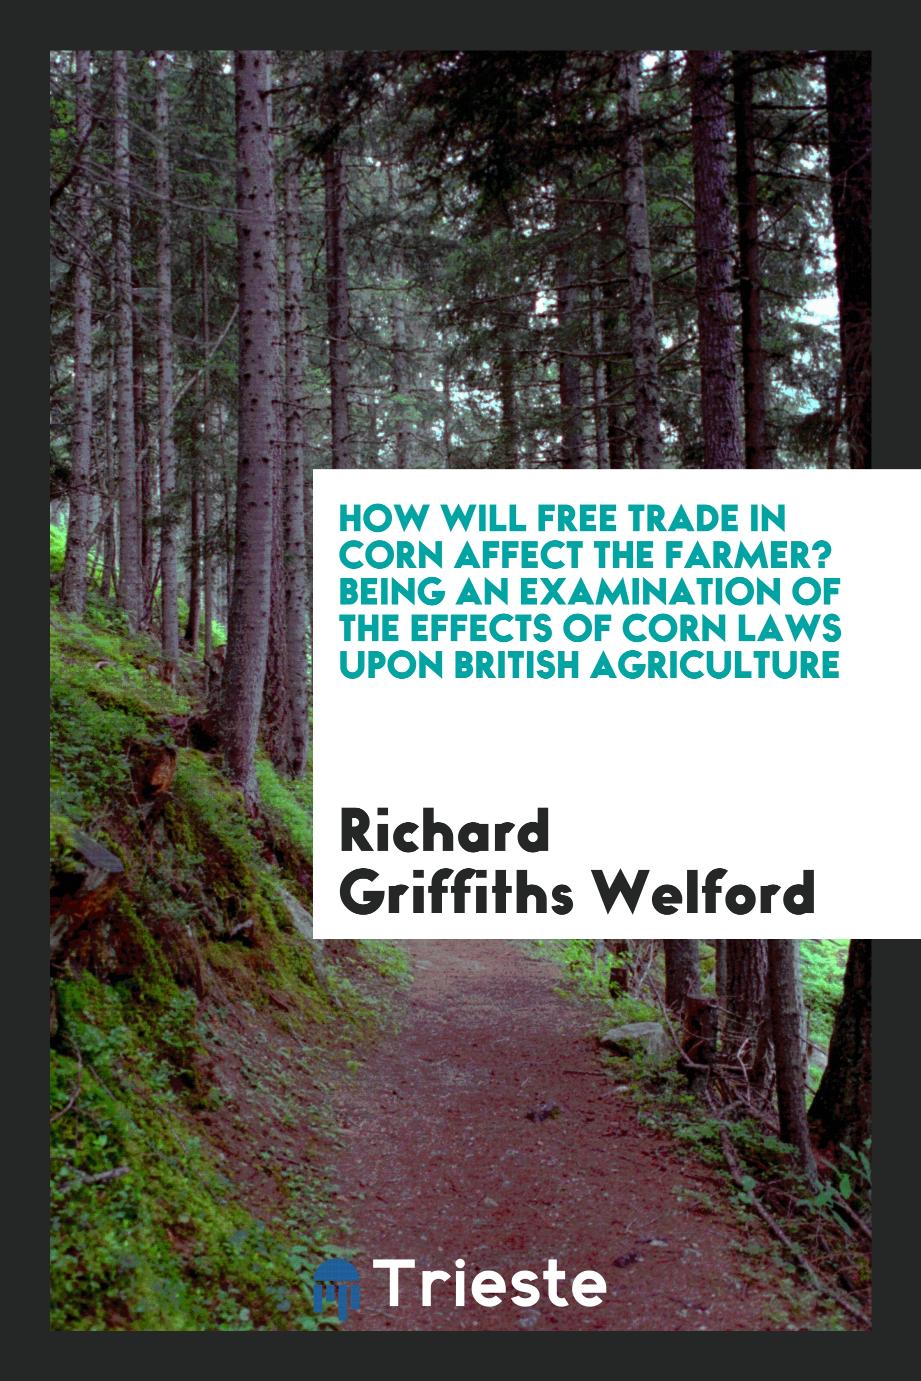 How will free trade in corn affect the farmer? Being an examination of the effects of corn laws upon British agriculture